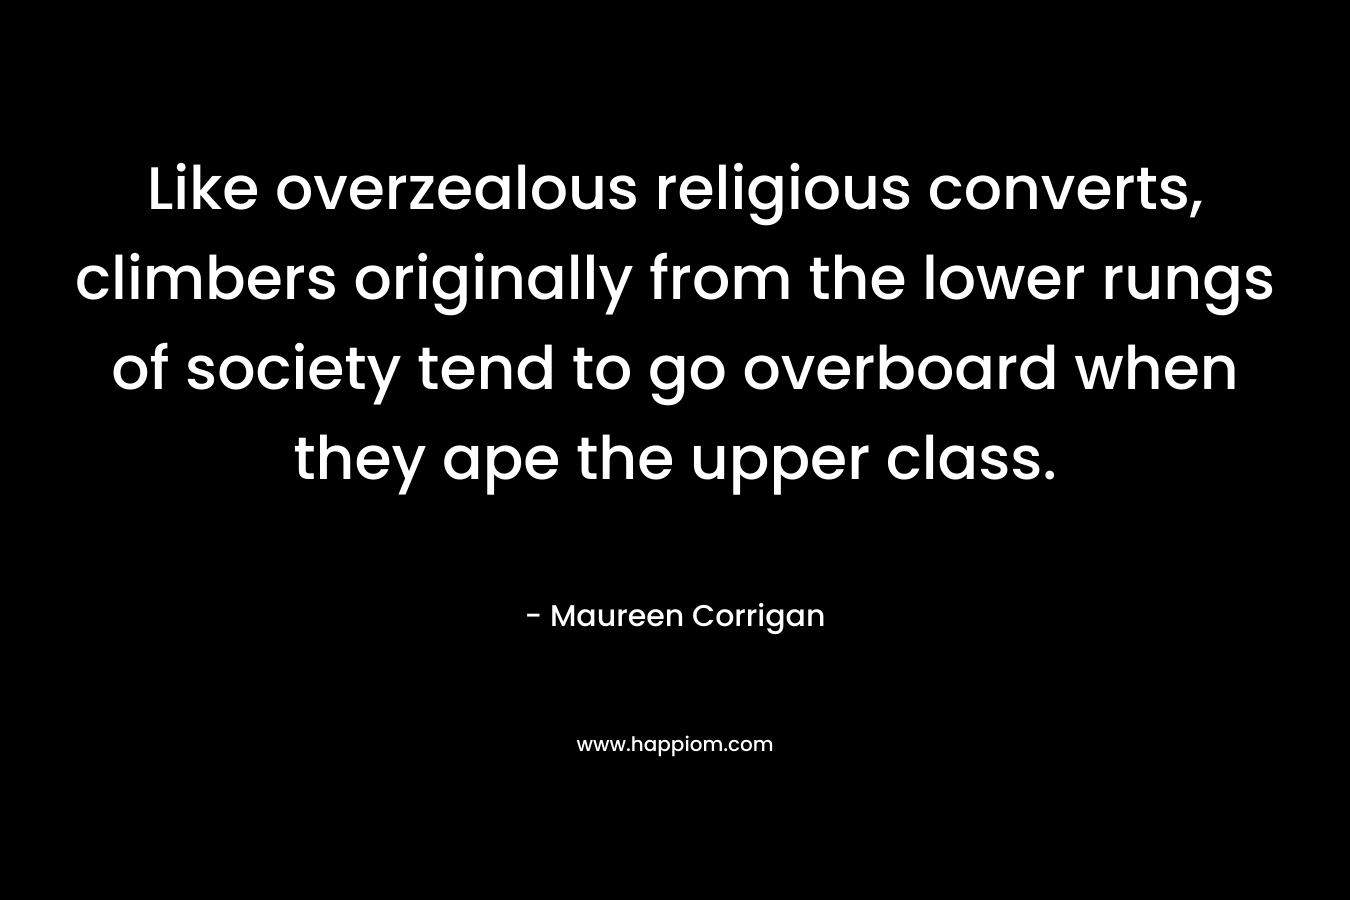 Like overzealous religious converts, climbers originally from the lower rungs of society tend to go overboard when they ape the upper class.